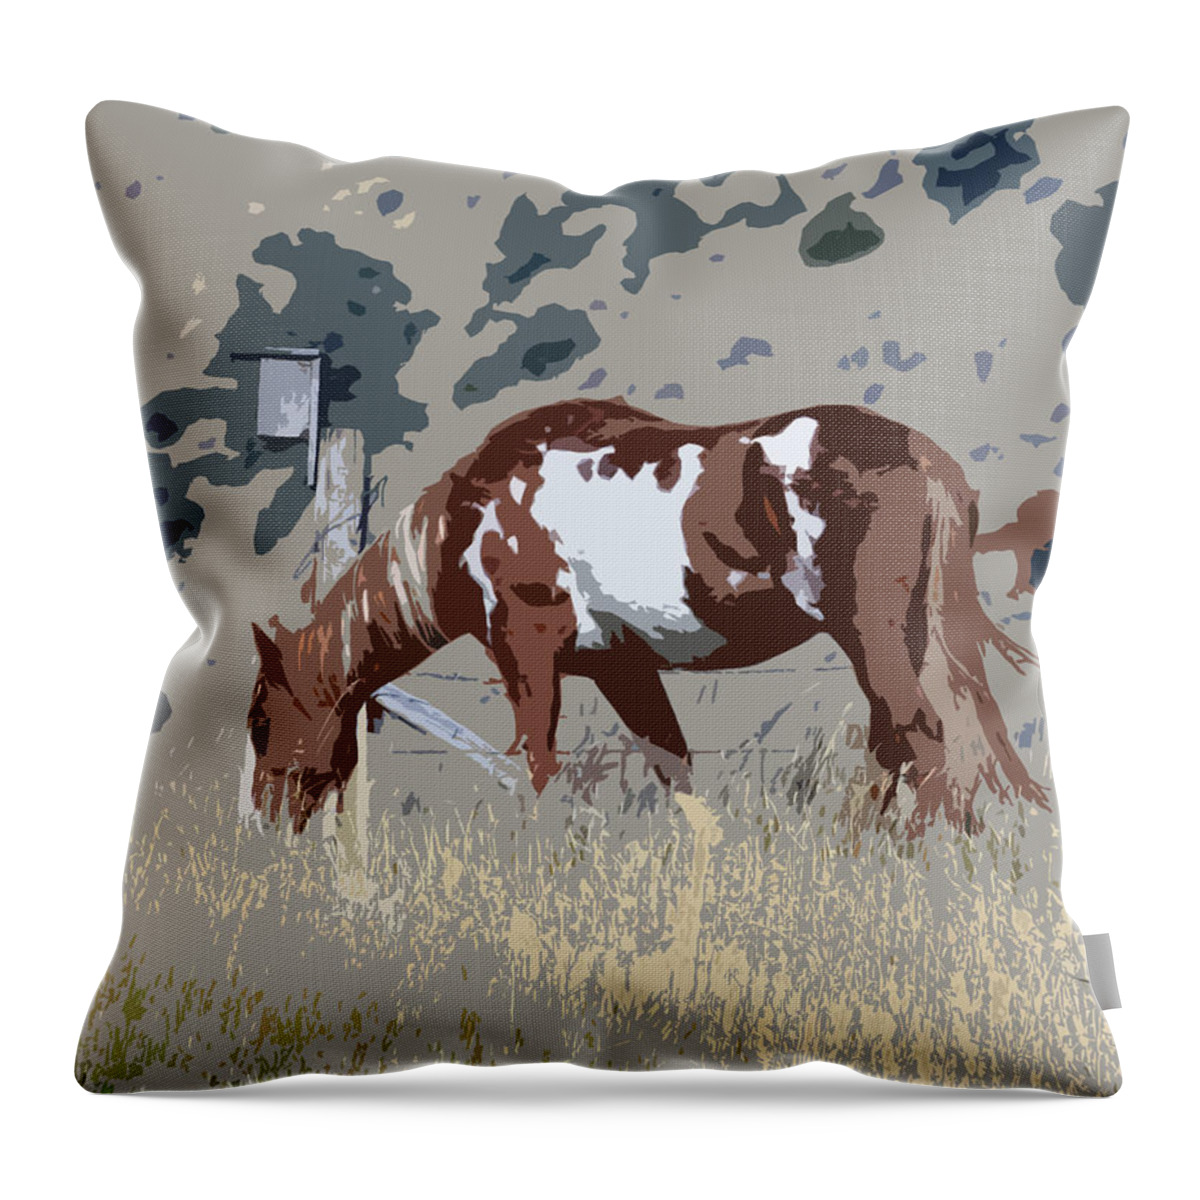 Painted Horse Throw Pillow featuring the photograph Painted Horse by Steve McKinzie